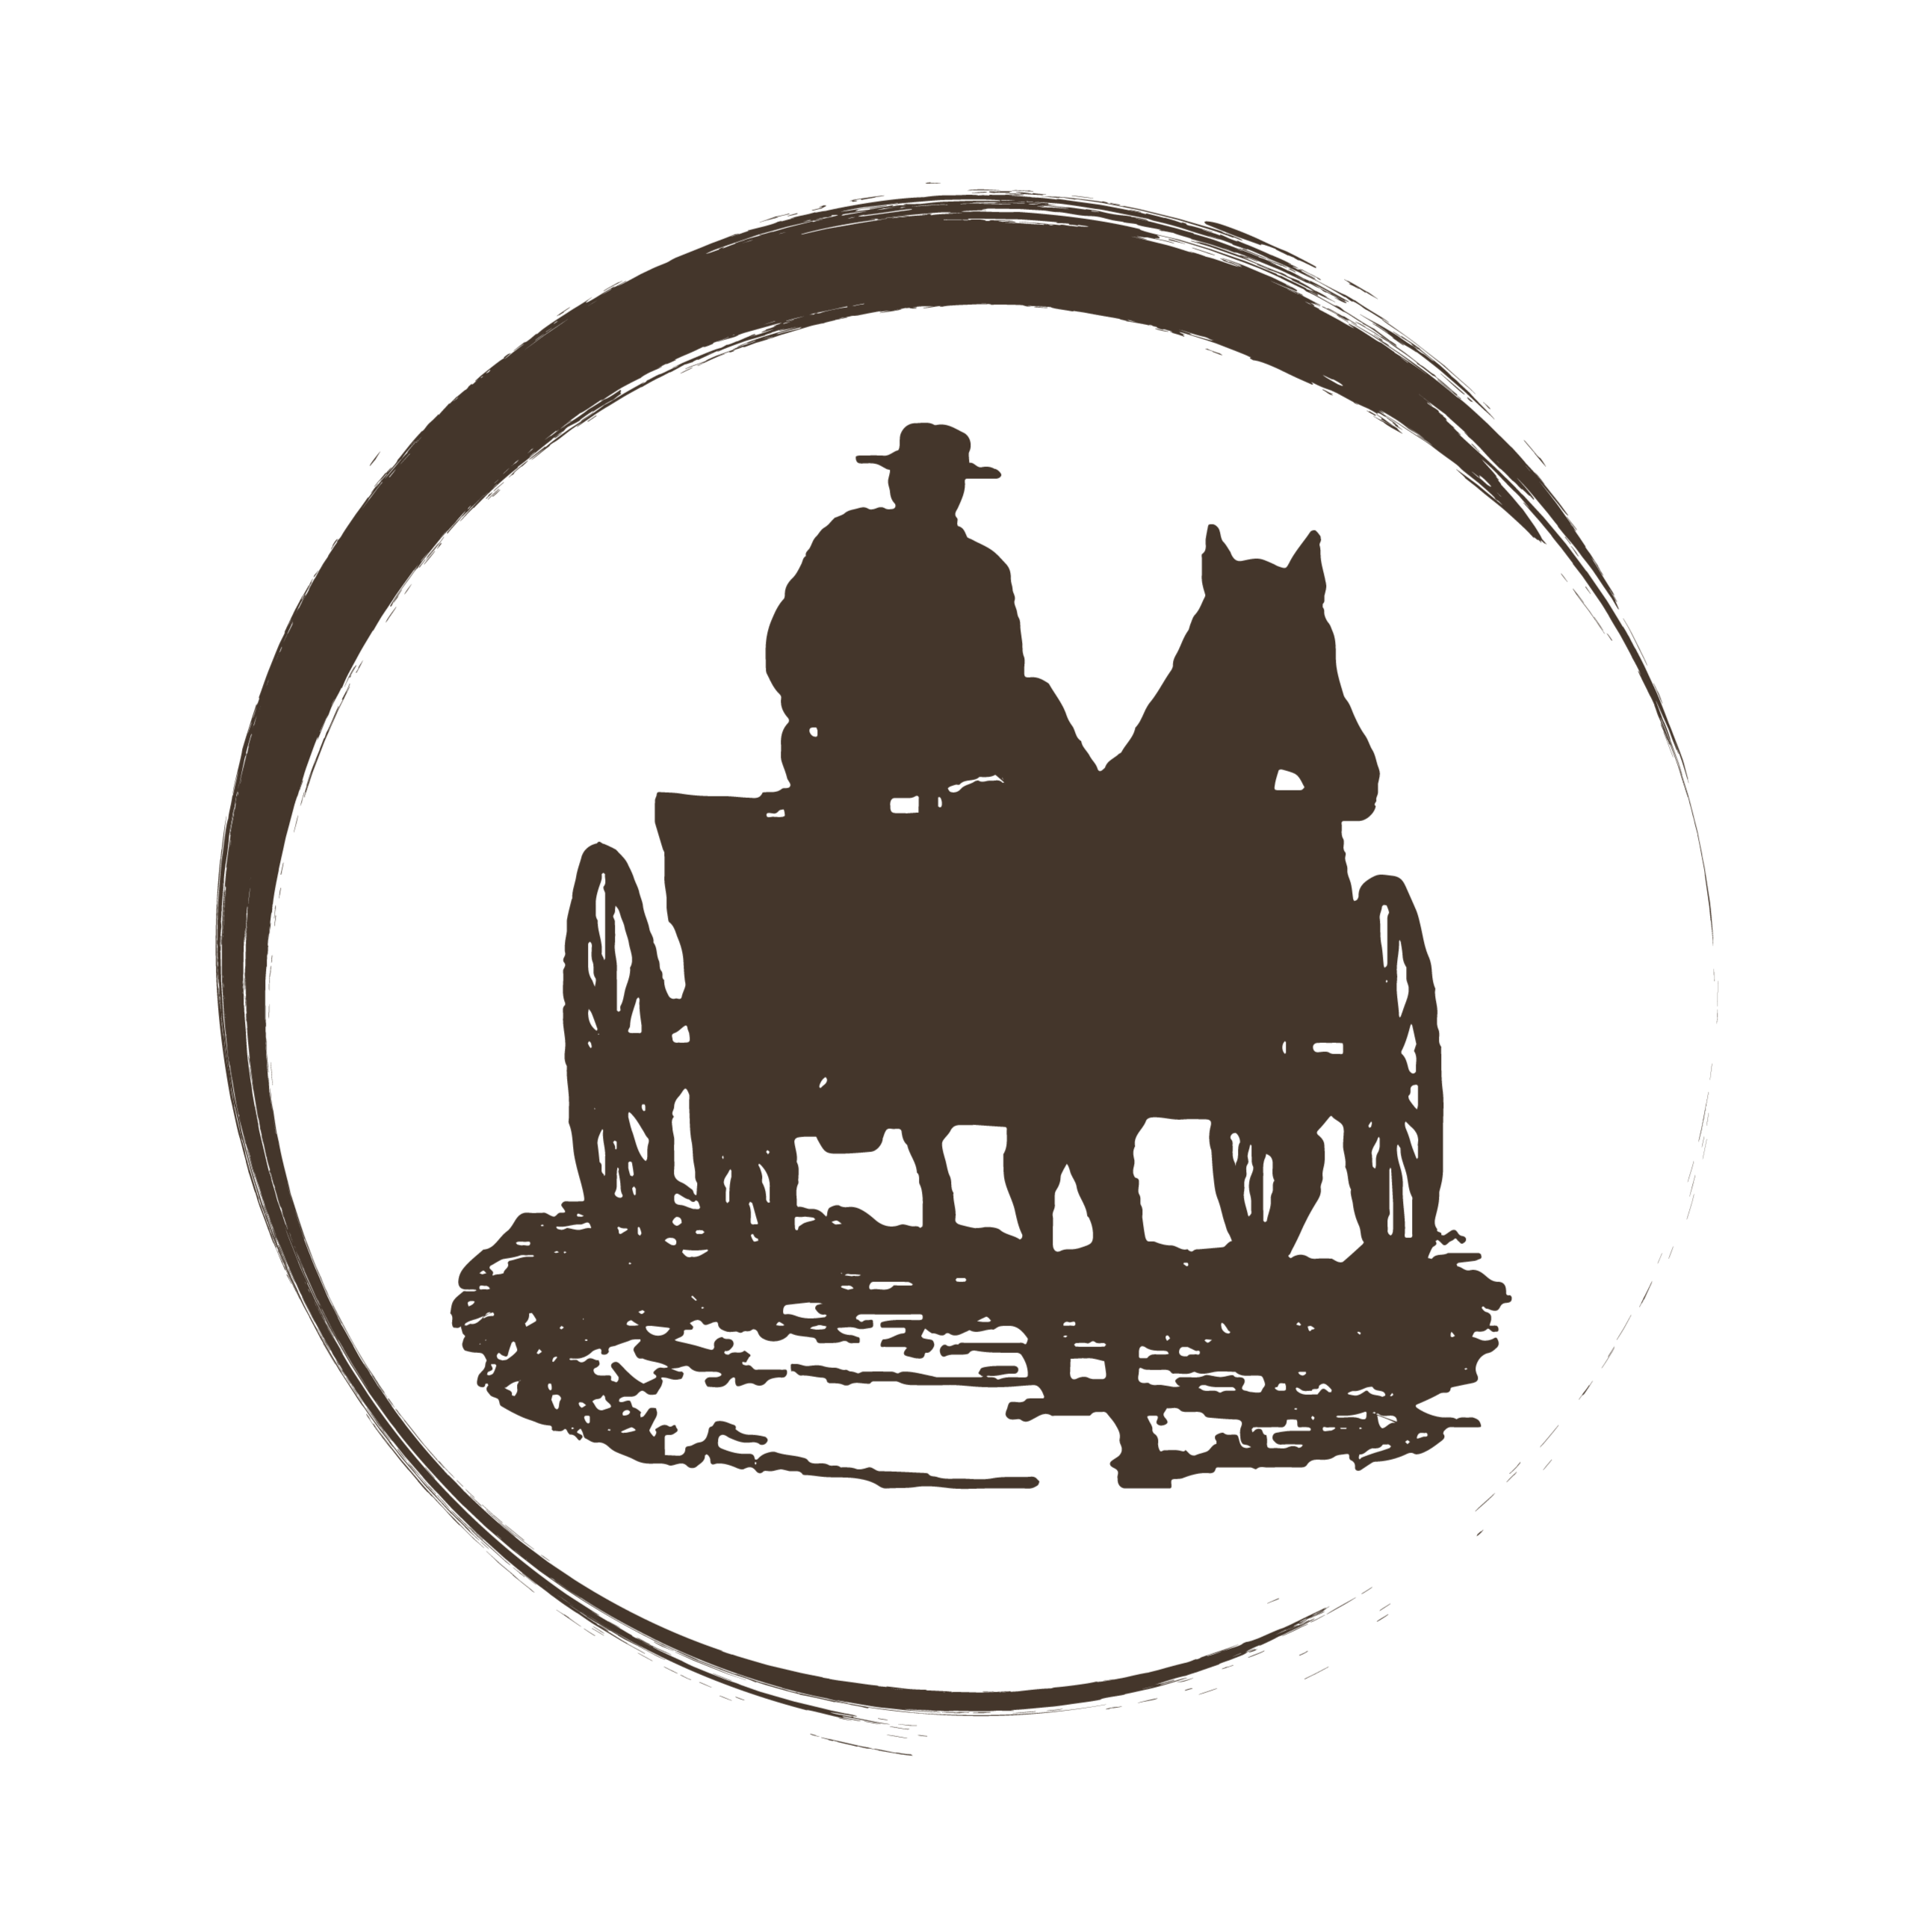 Man driving a horse and wagon.